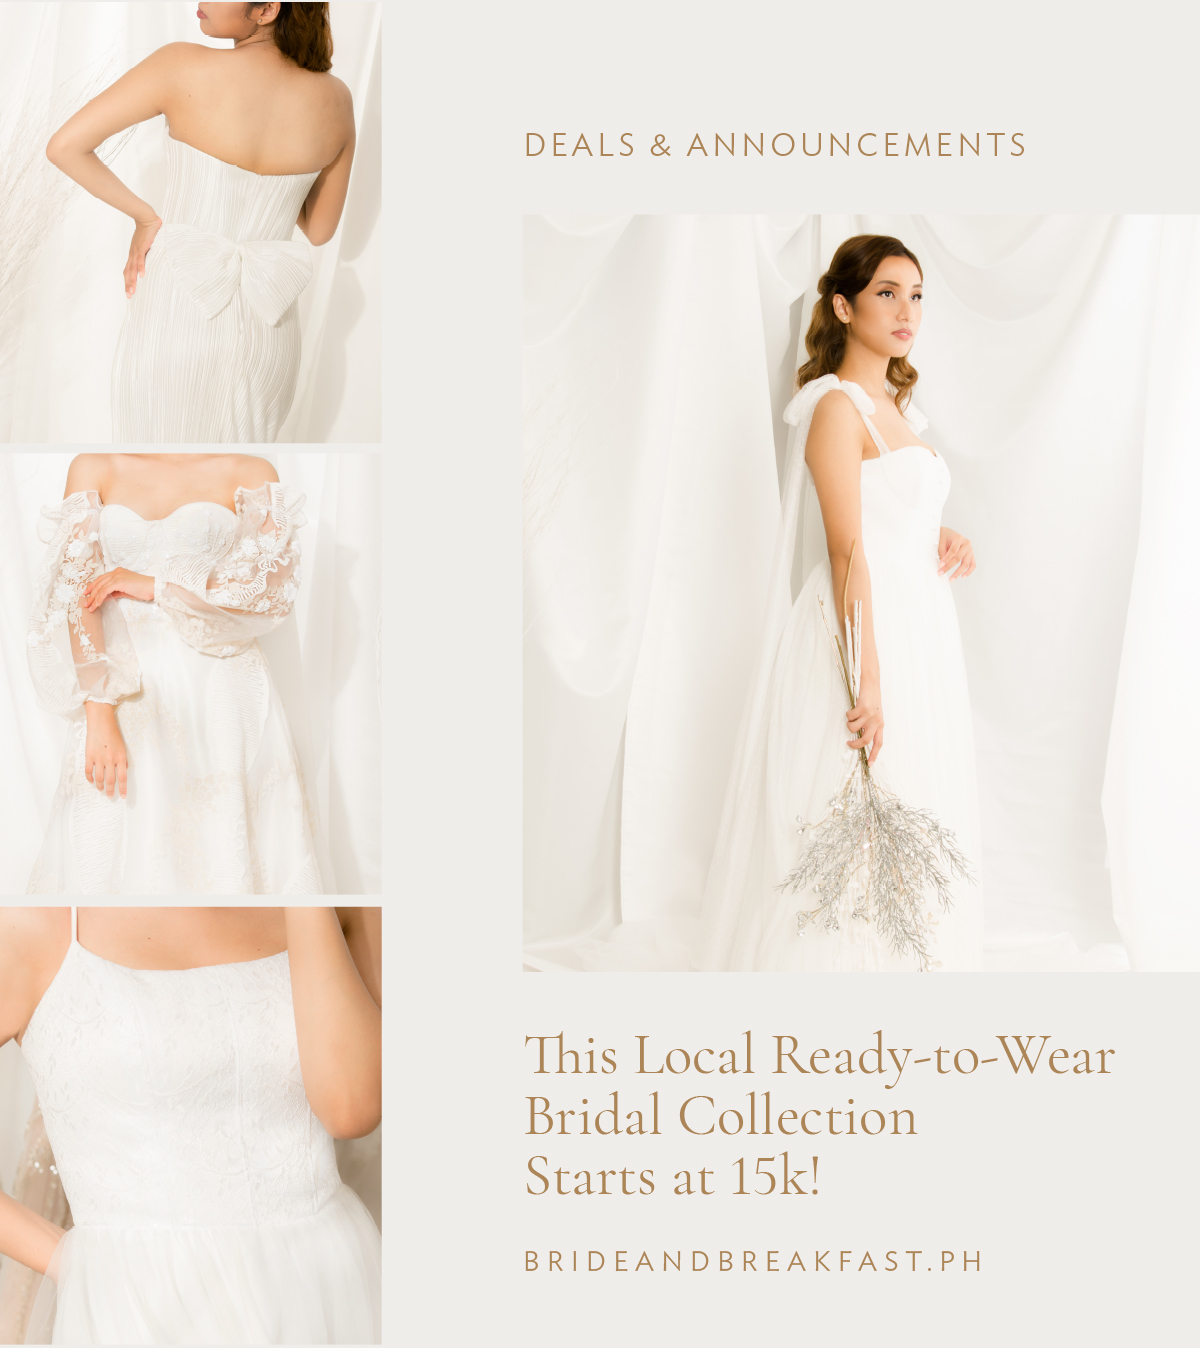 This Local Ready-to-Wear Bridal Collection Starts at 15k!